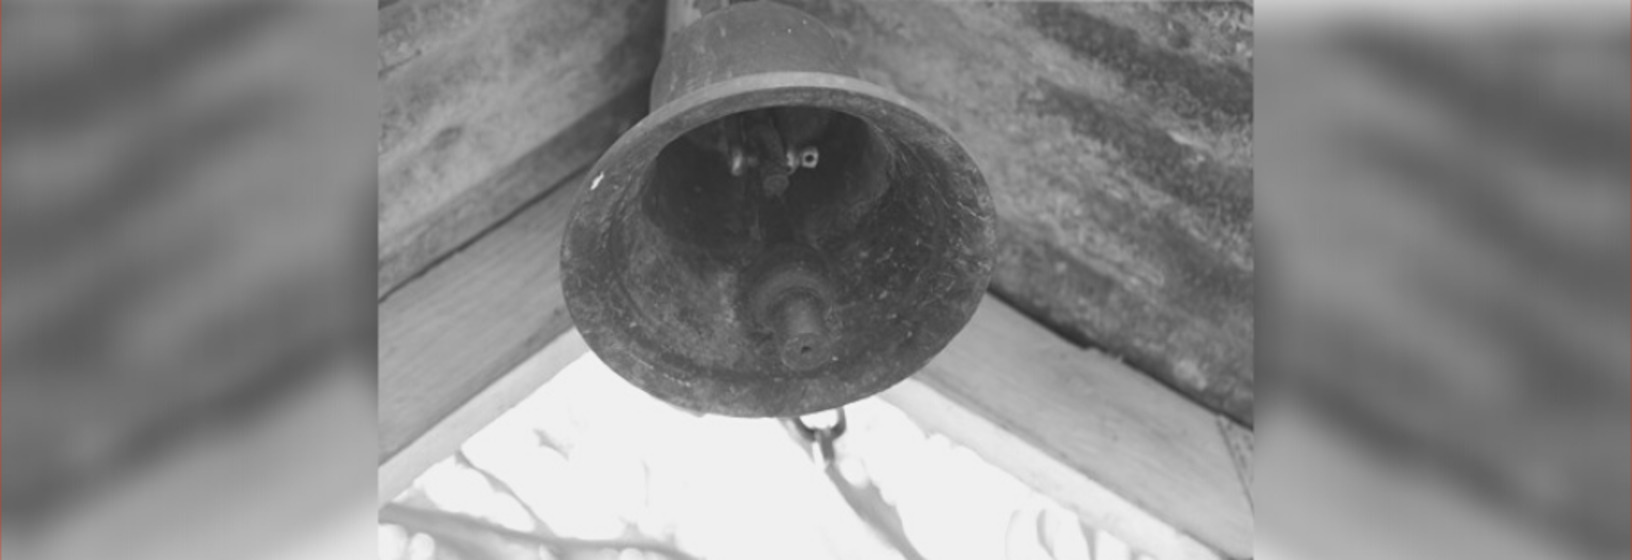 Bell in tower